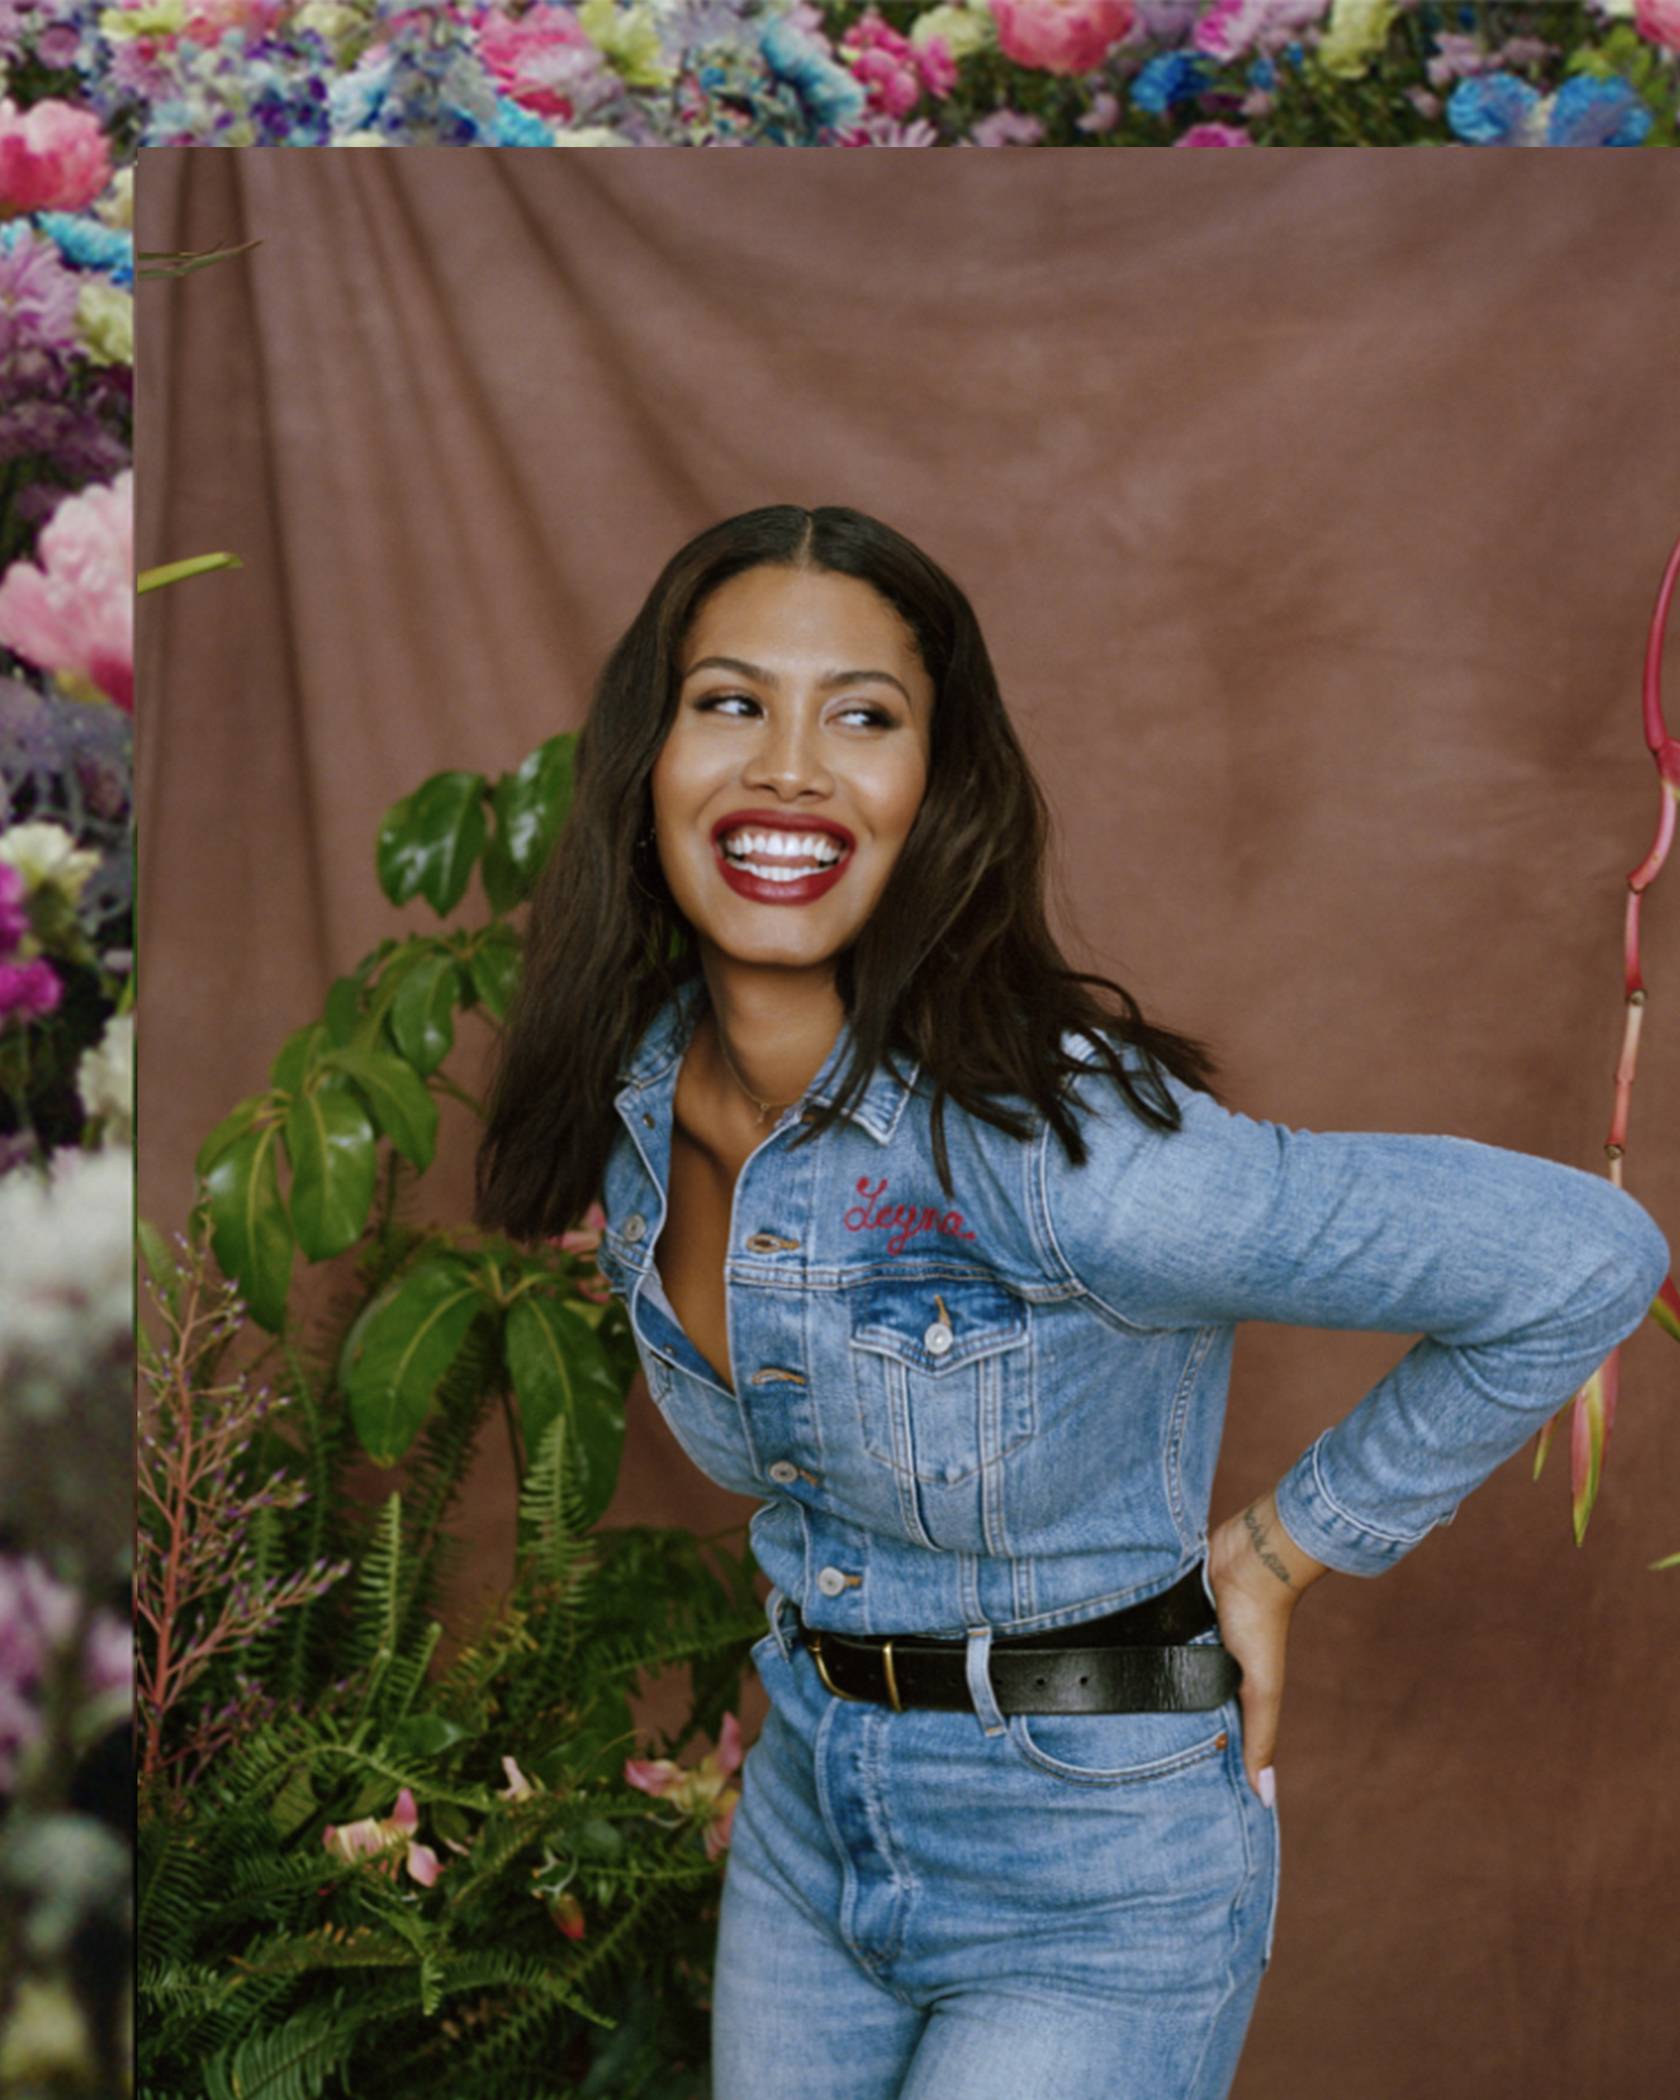 Leyna Bloom laughing wearing Levi's jeans and a denim button up Levi's shirt with her name embroidered on the front left pocket.